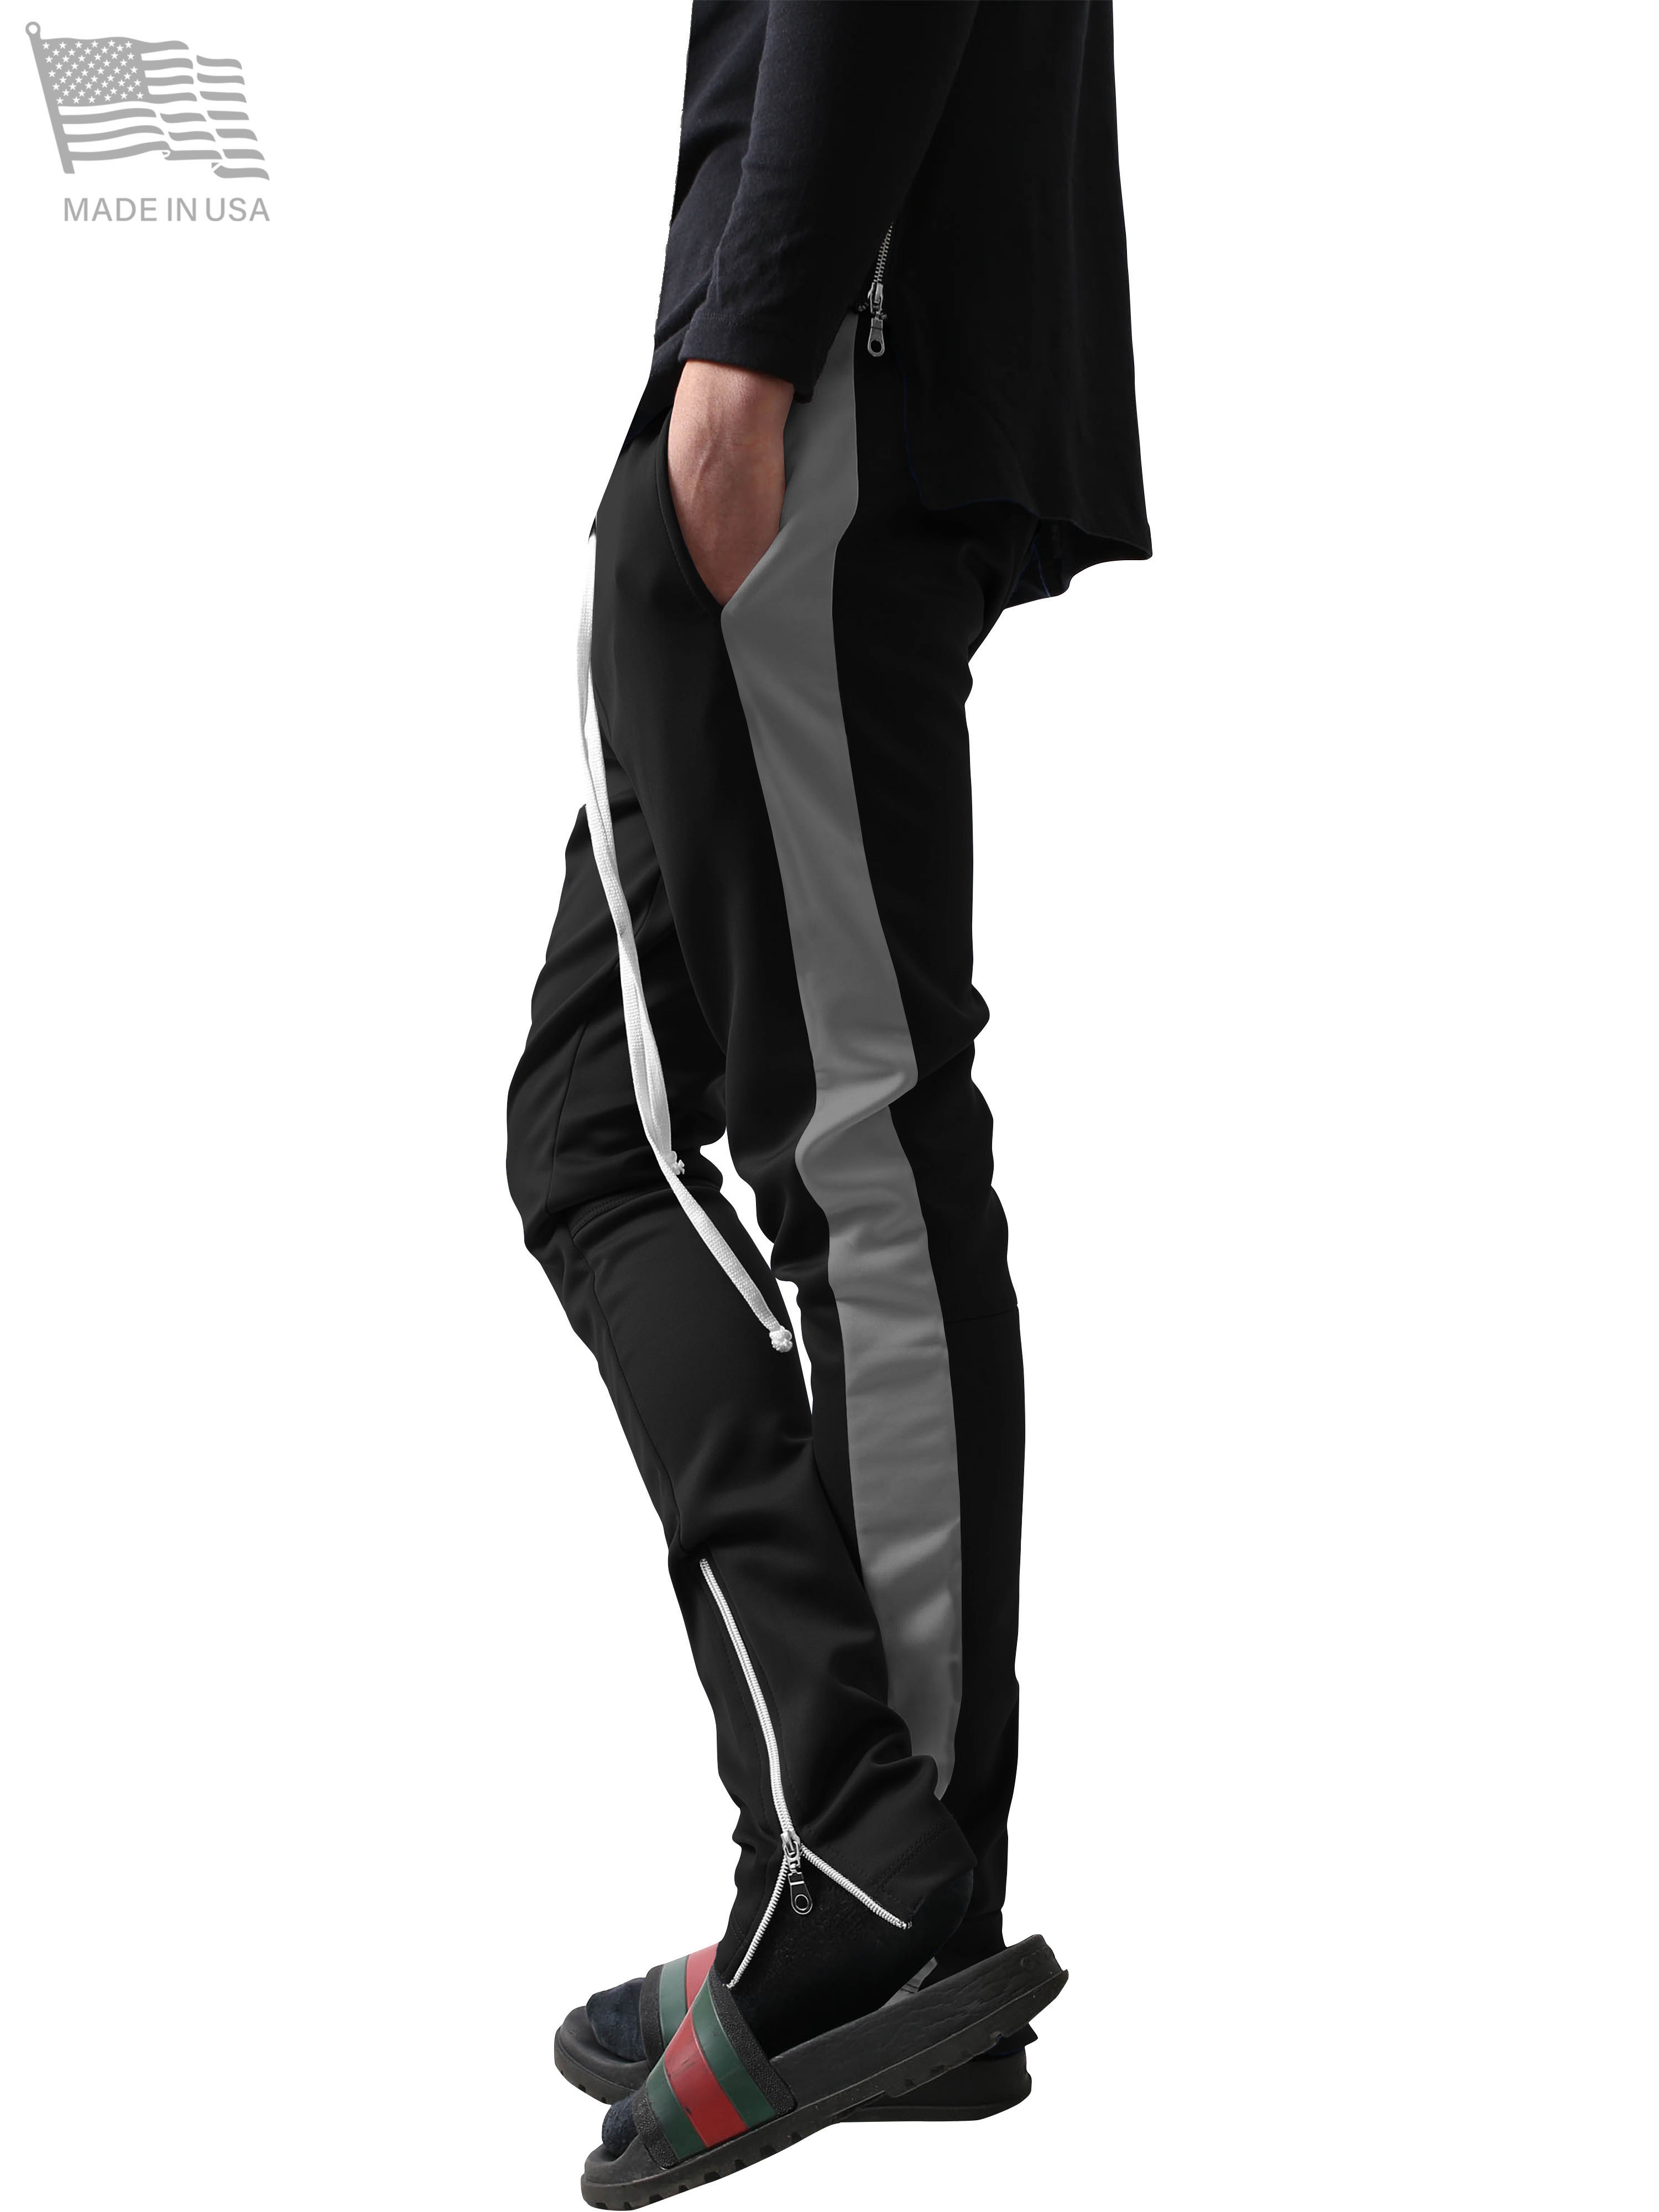 Hat and Beyond Mens Premium Track Pants Made in USA Two Tone Stripe with Ankle Zipper Hip Hop Streetwear